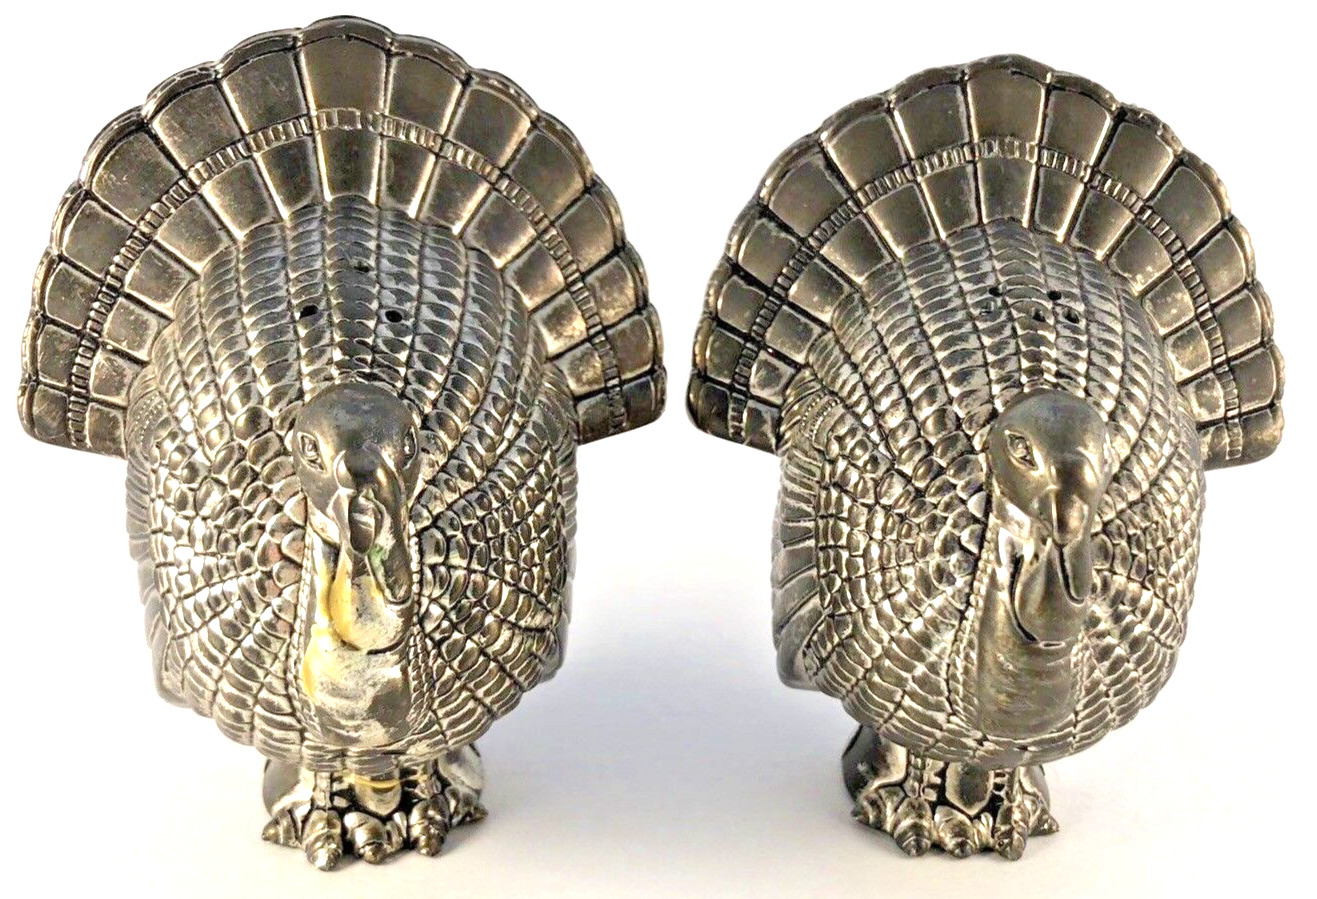 Vintage International Silver Company Turkey Thanksgiving Salt and Pepper Shakers